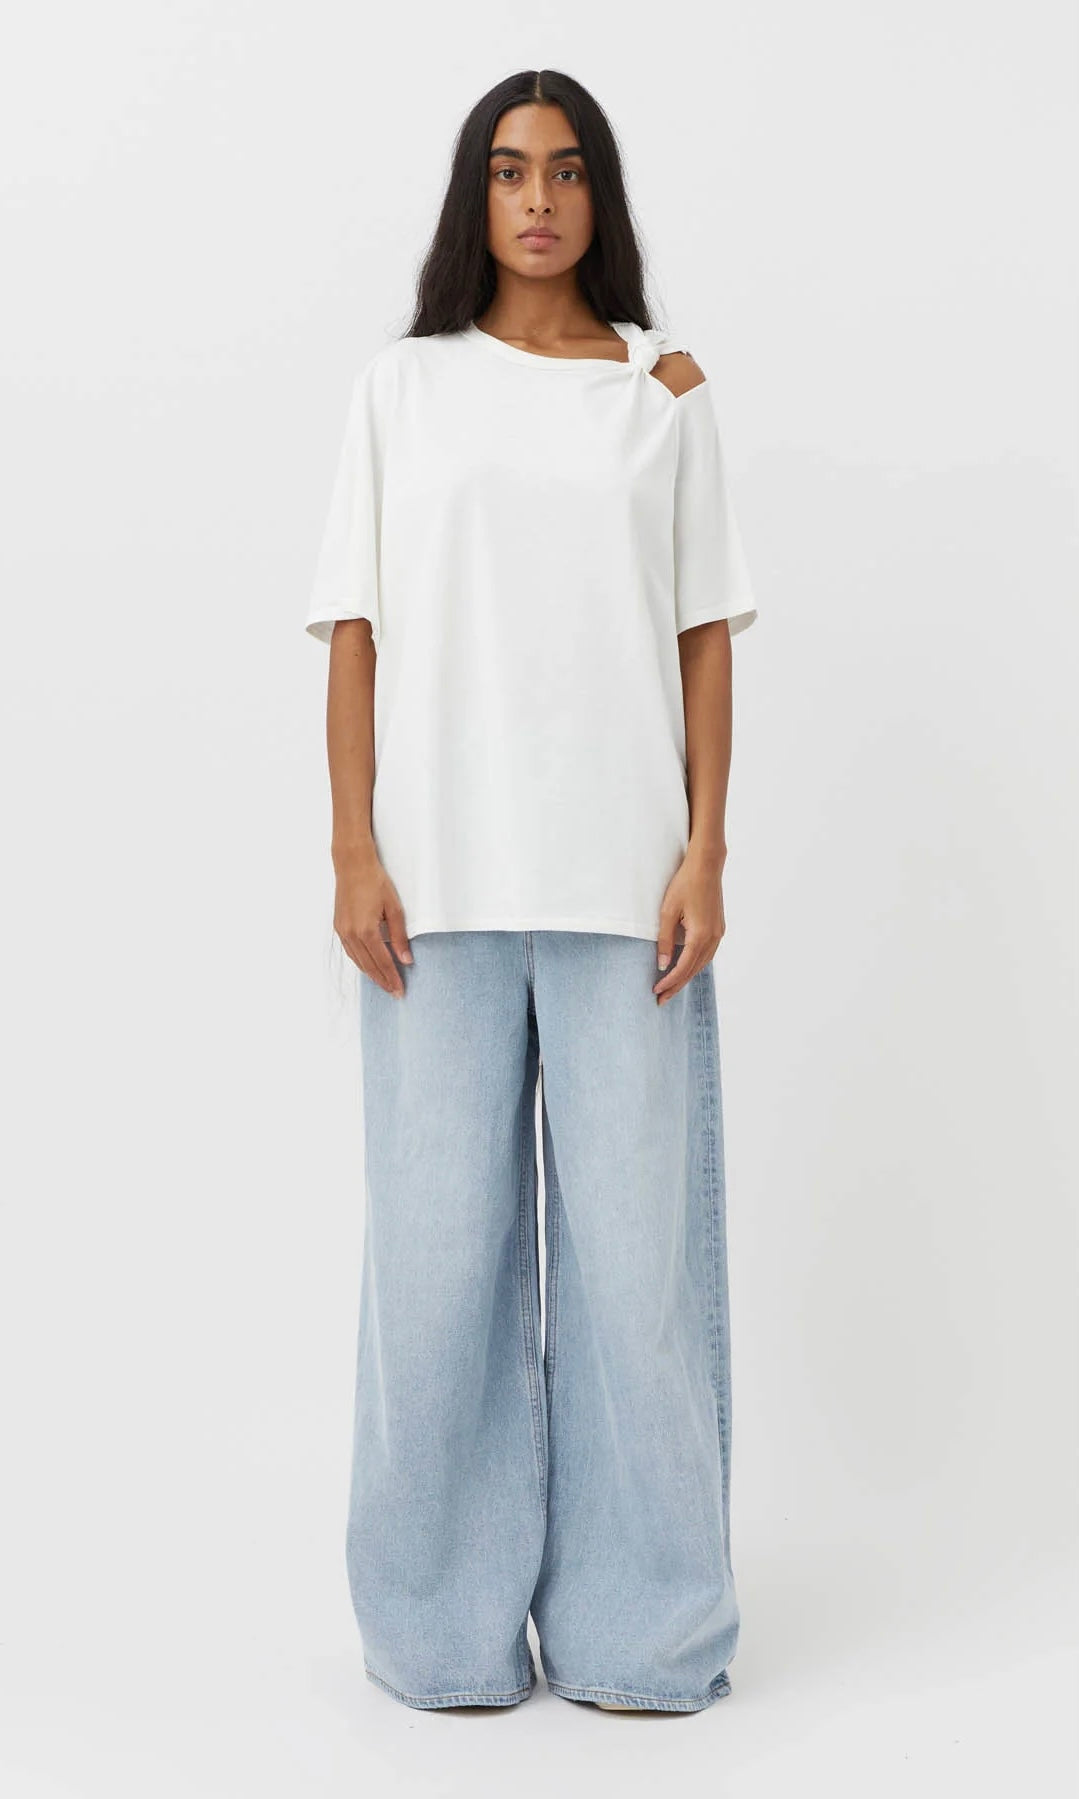 Camilla and Marc Juno Knot Tee In Soft White